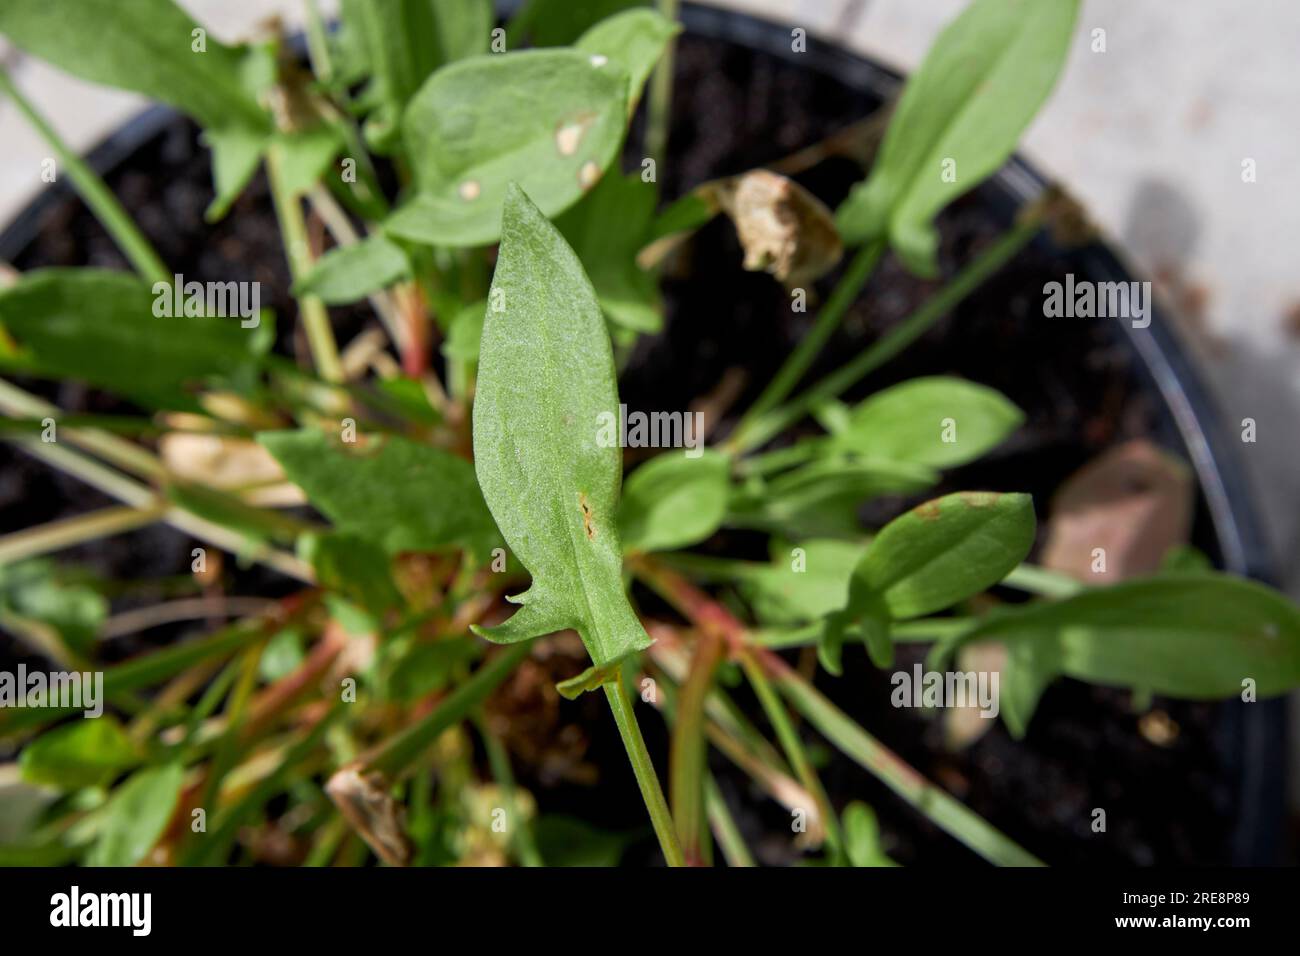 sheeps sorrel rumex acetosella growing in a pot in a garden in the uk Stock Photo